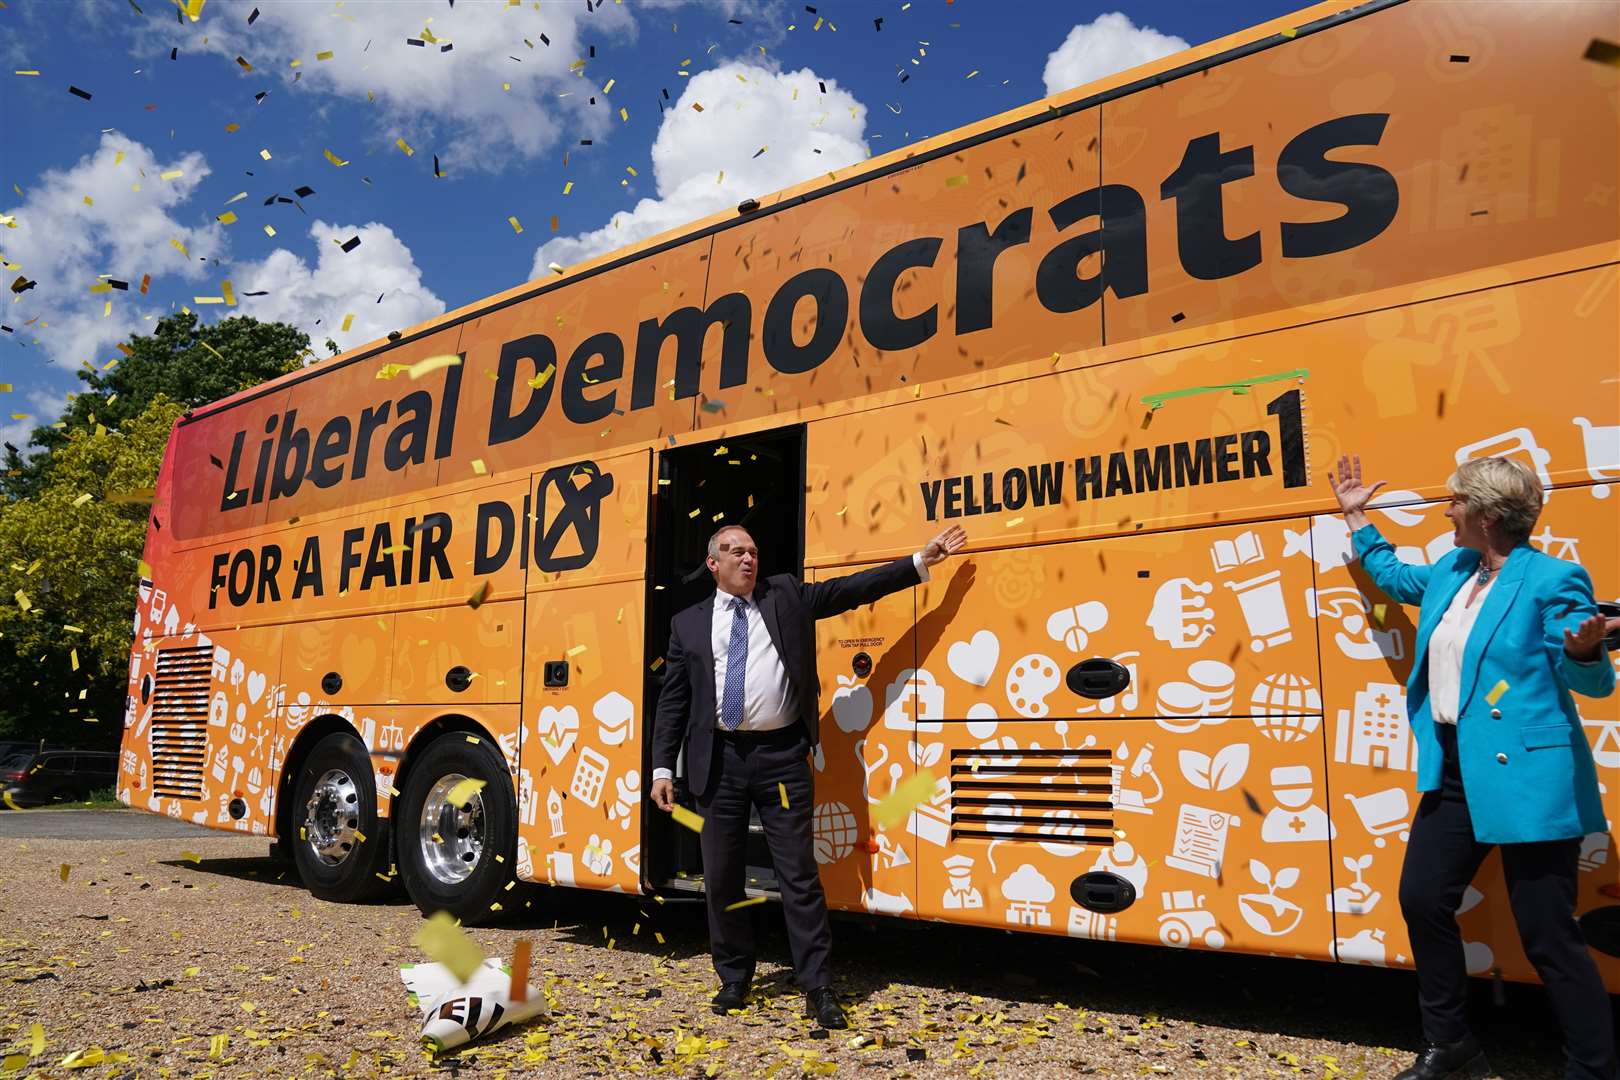 Liberal Democrat leader Sir Ed Davey, with local parliamentary candidate Pippa Heylings, at the launch of his party’s election battle bus at Whittlesford, Cambridge. on May 26 (Jacob King/PA)